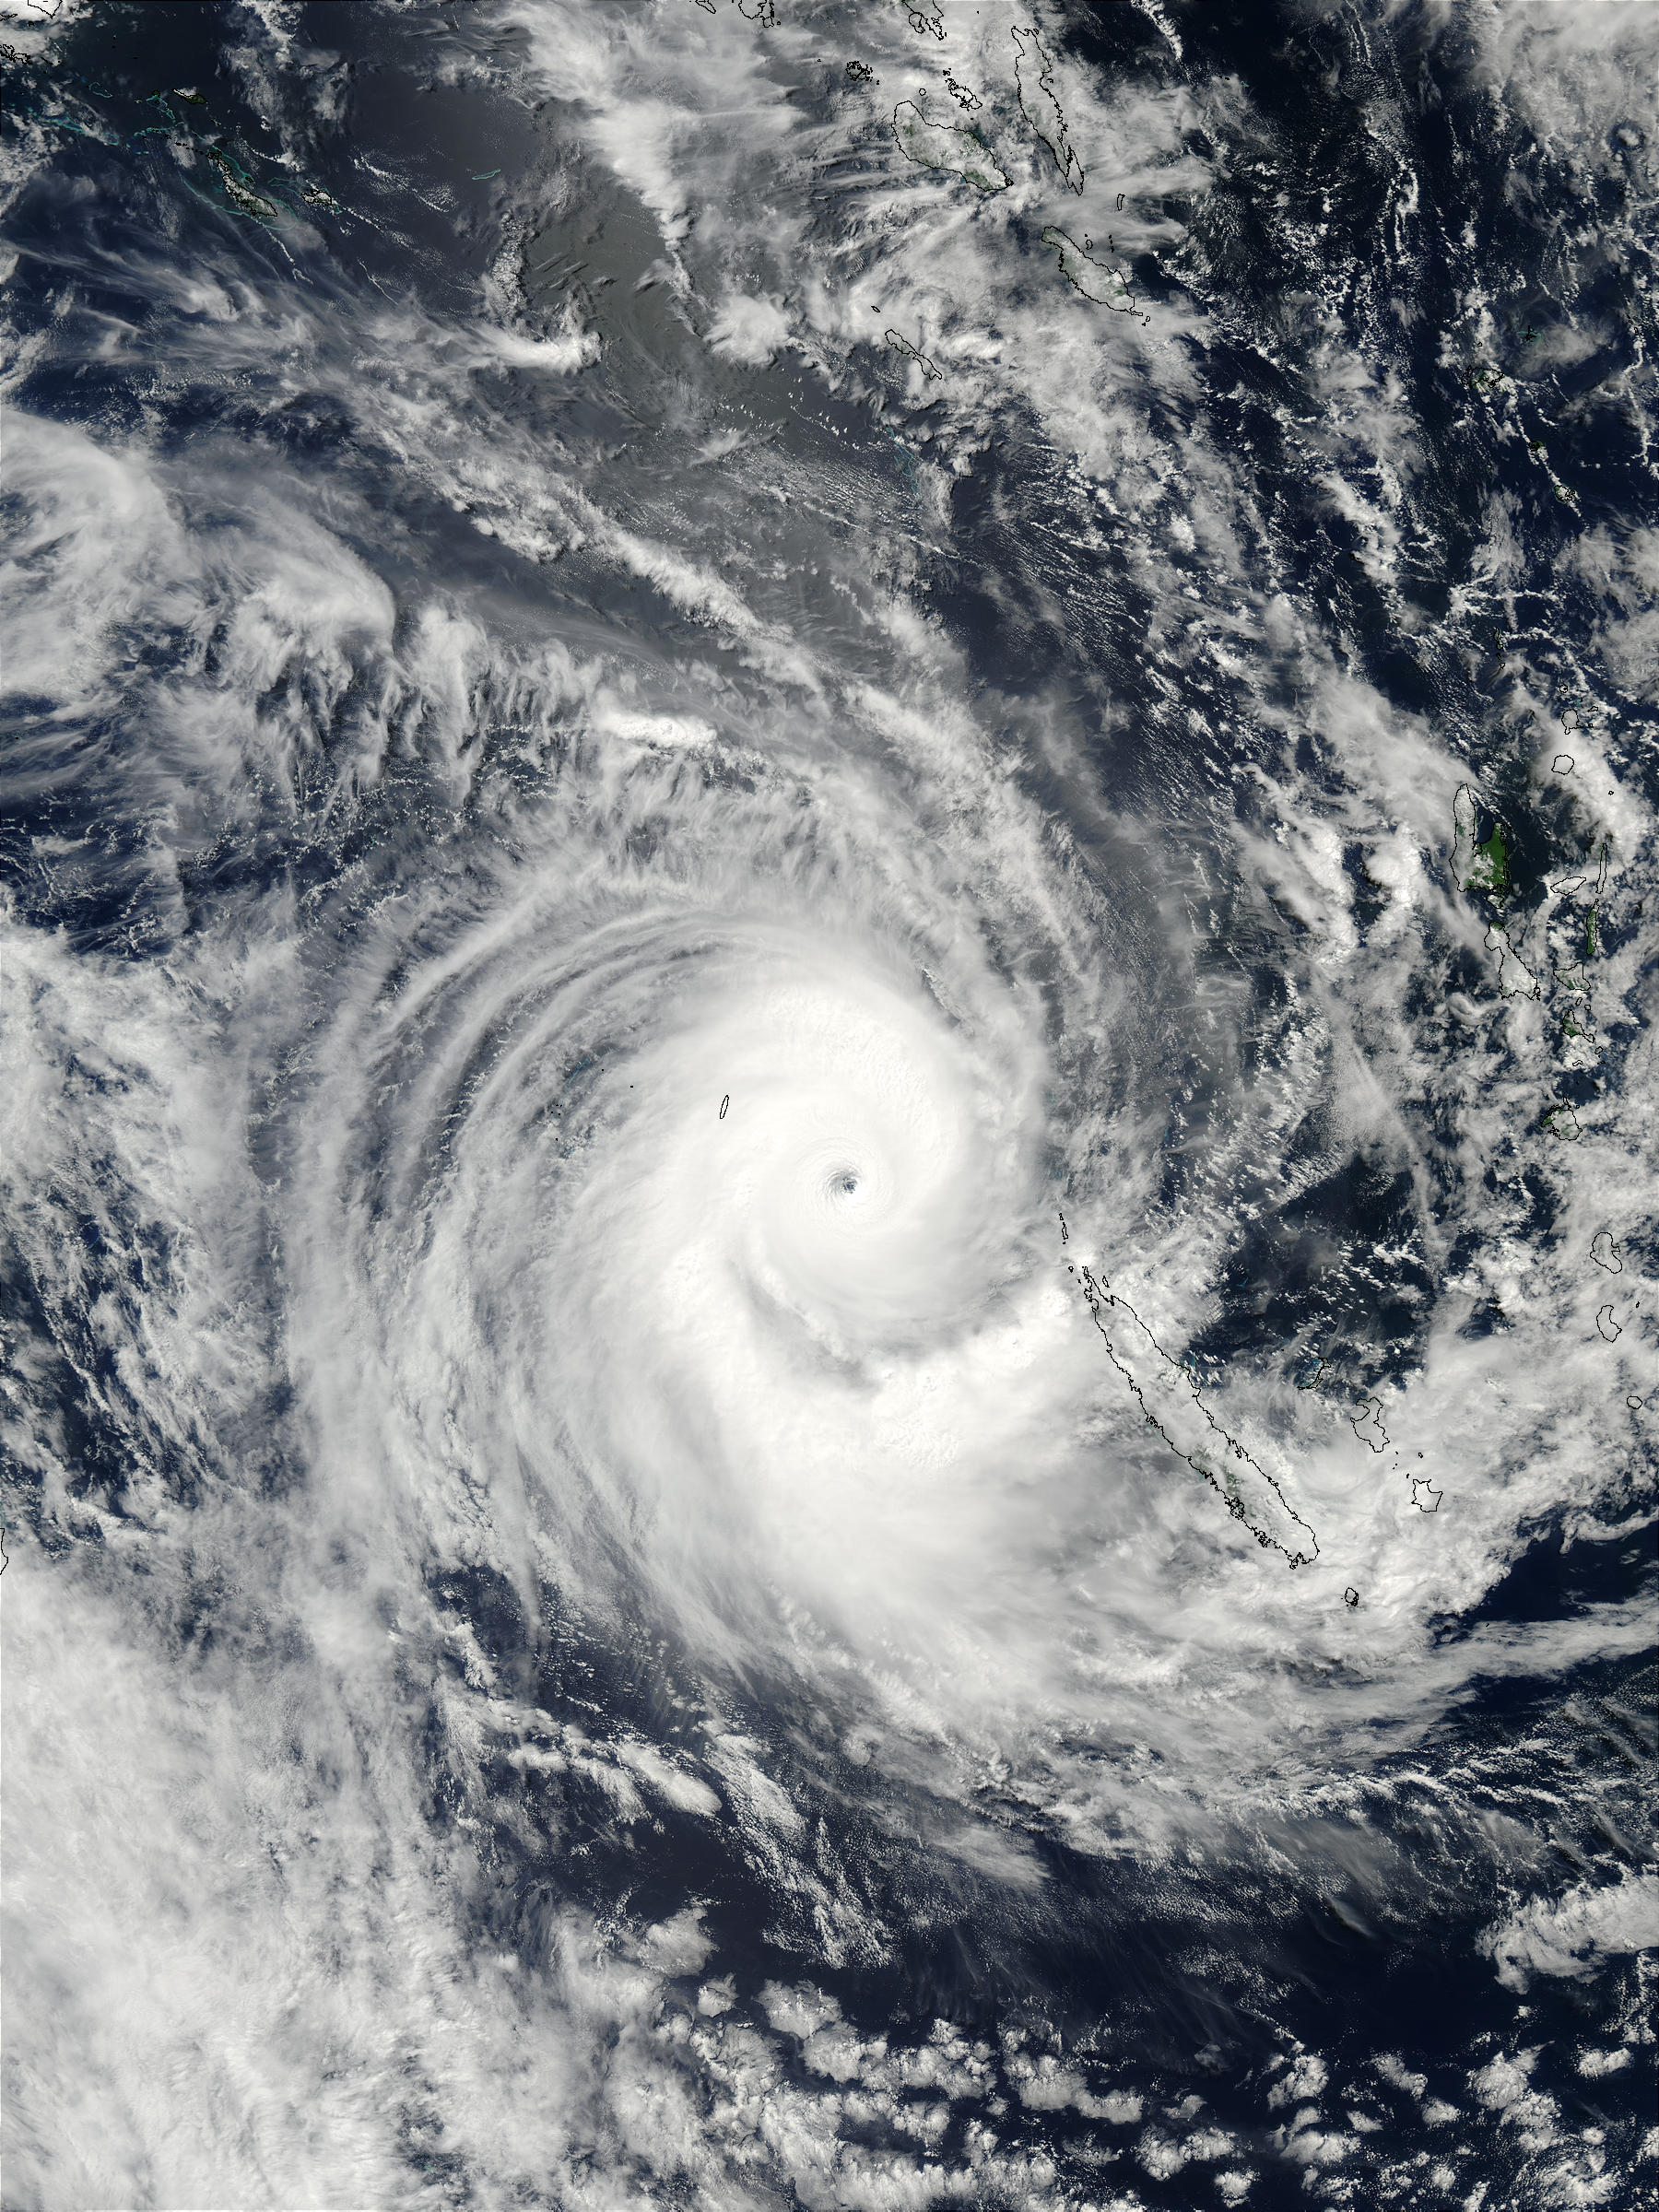 Tropical Cyclone Erica Off New Caledonia - related image preview